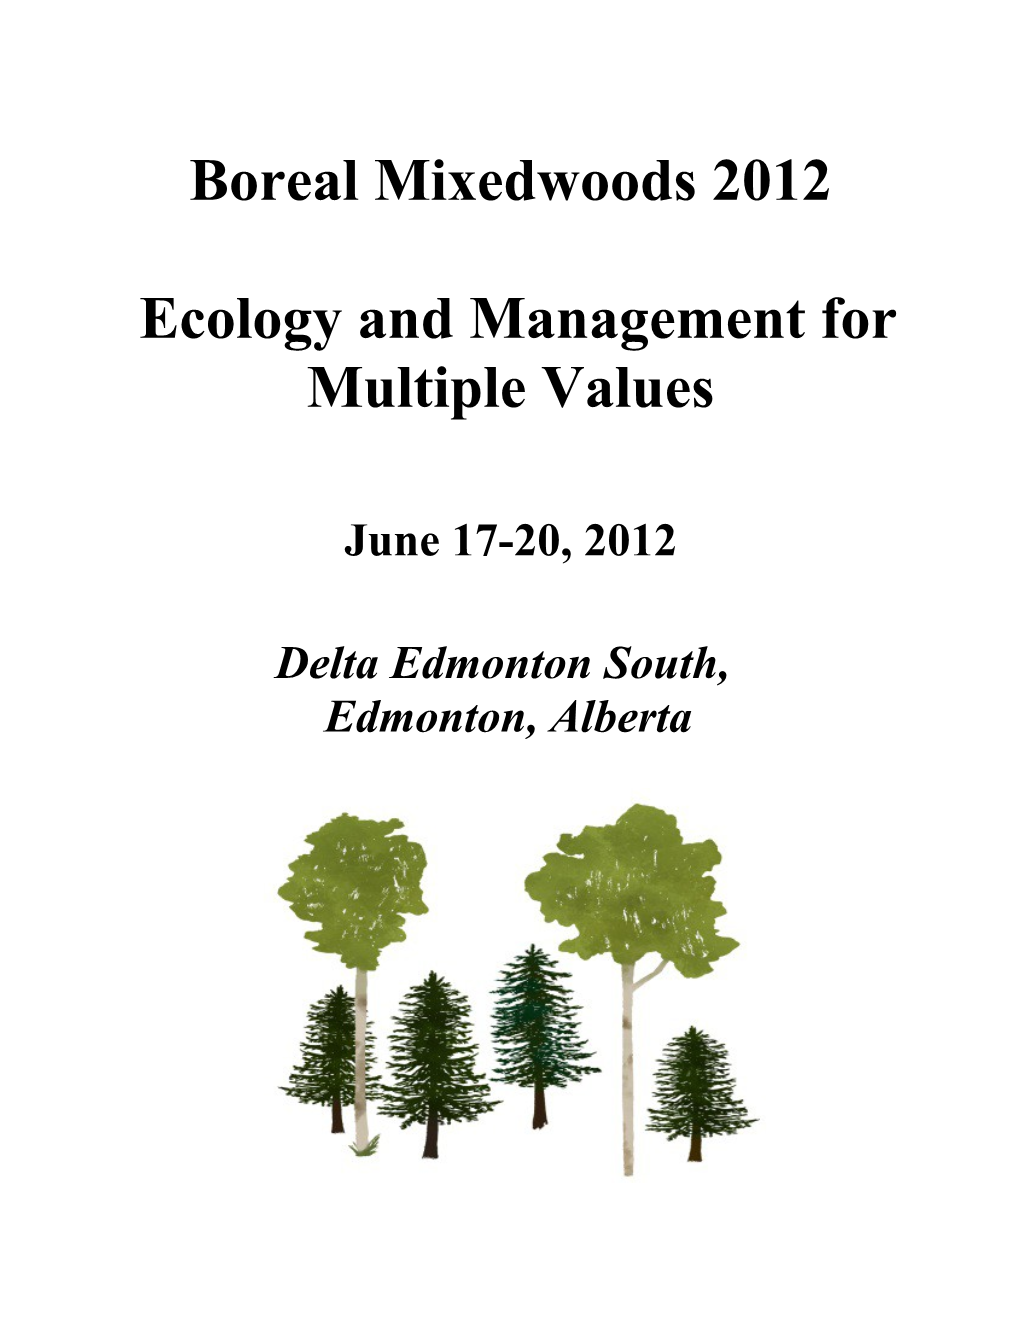 Boreal Mixedwoods 2012 Ecology and Management for Multiple Values